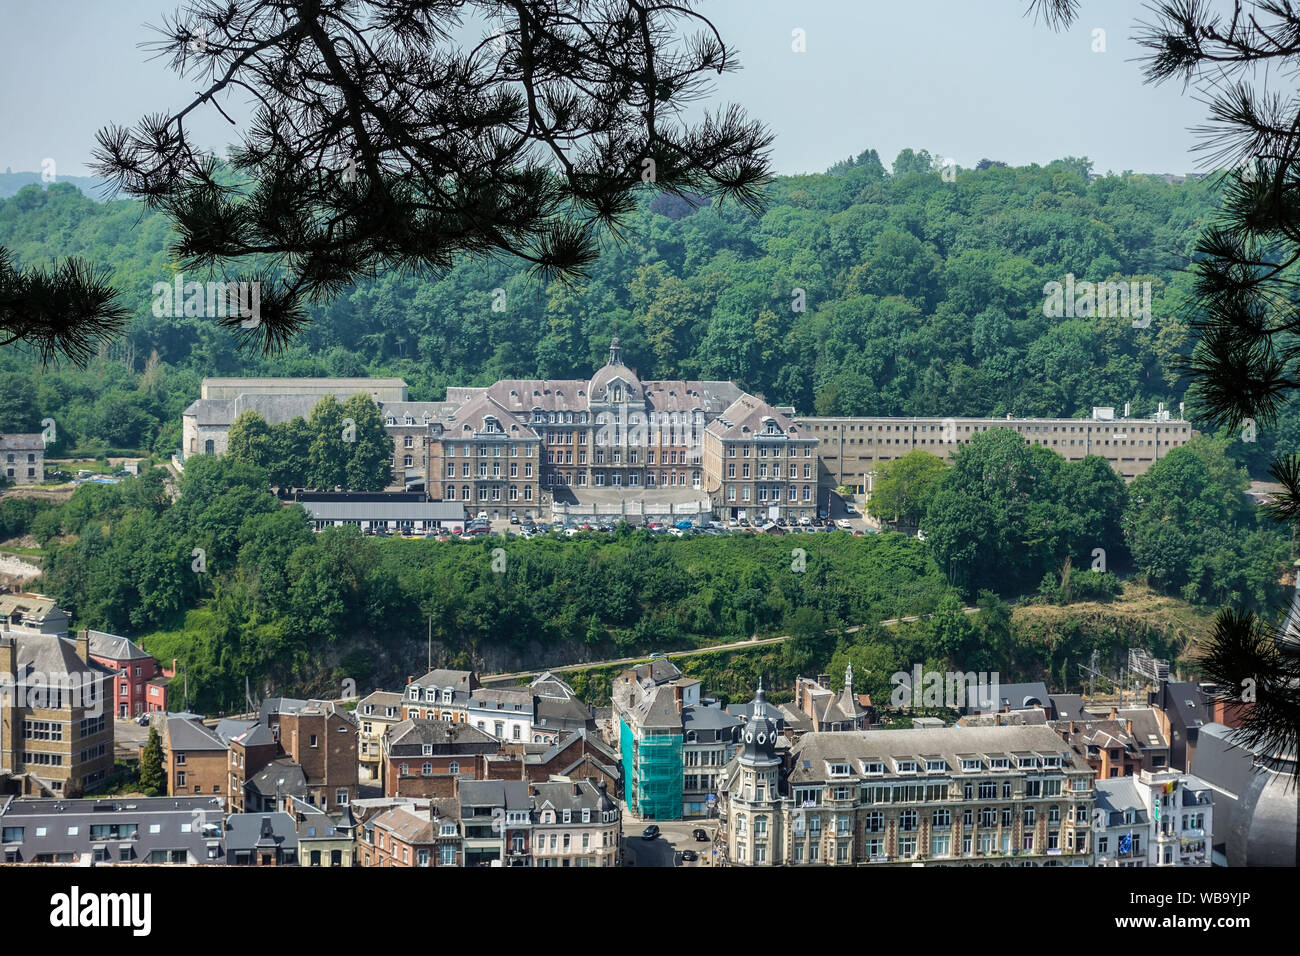 Dinant, Belgium - June 26, 2019: Seen from Citadelle. Large building is College Notre Dame de Bellevue, school system from primary to high school. For Stock Photo